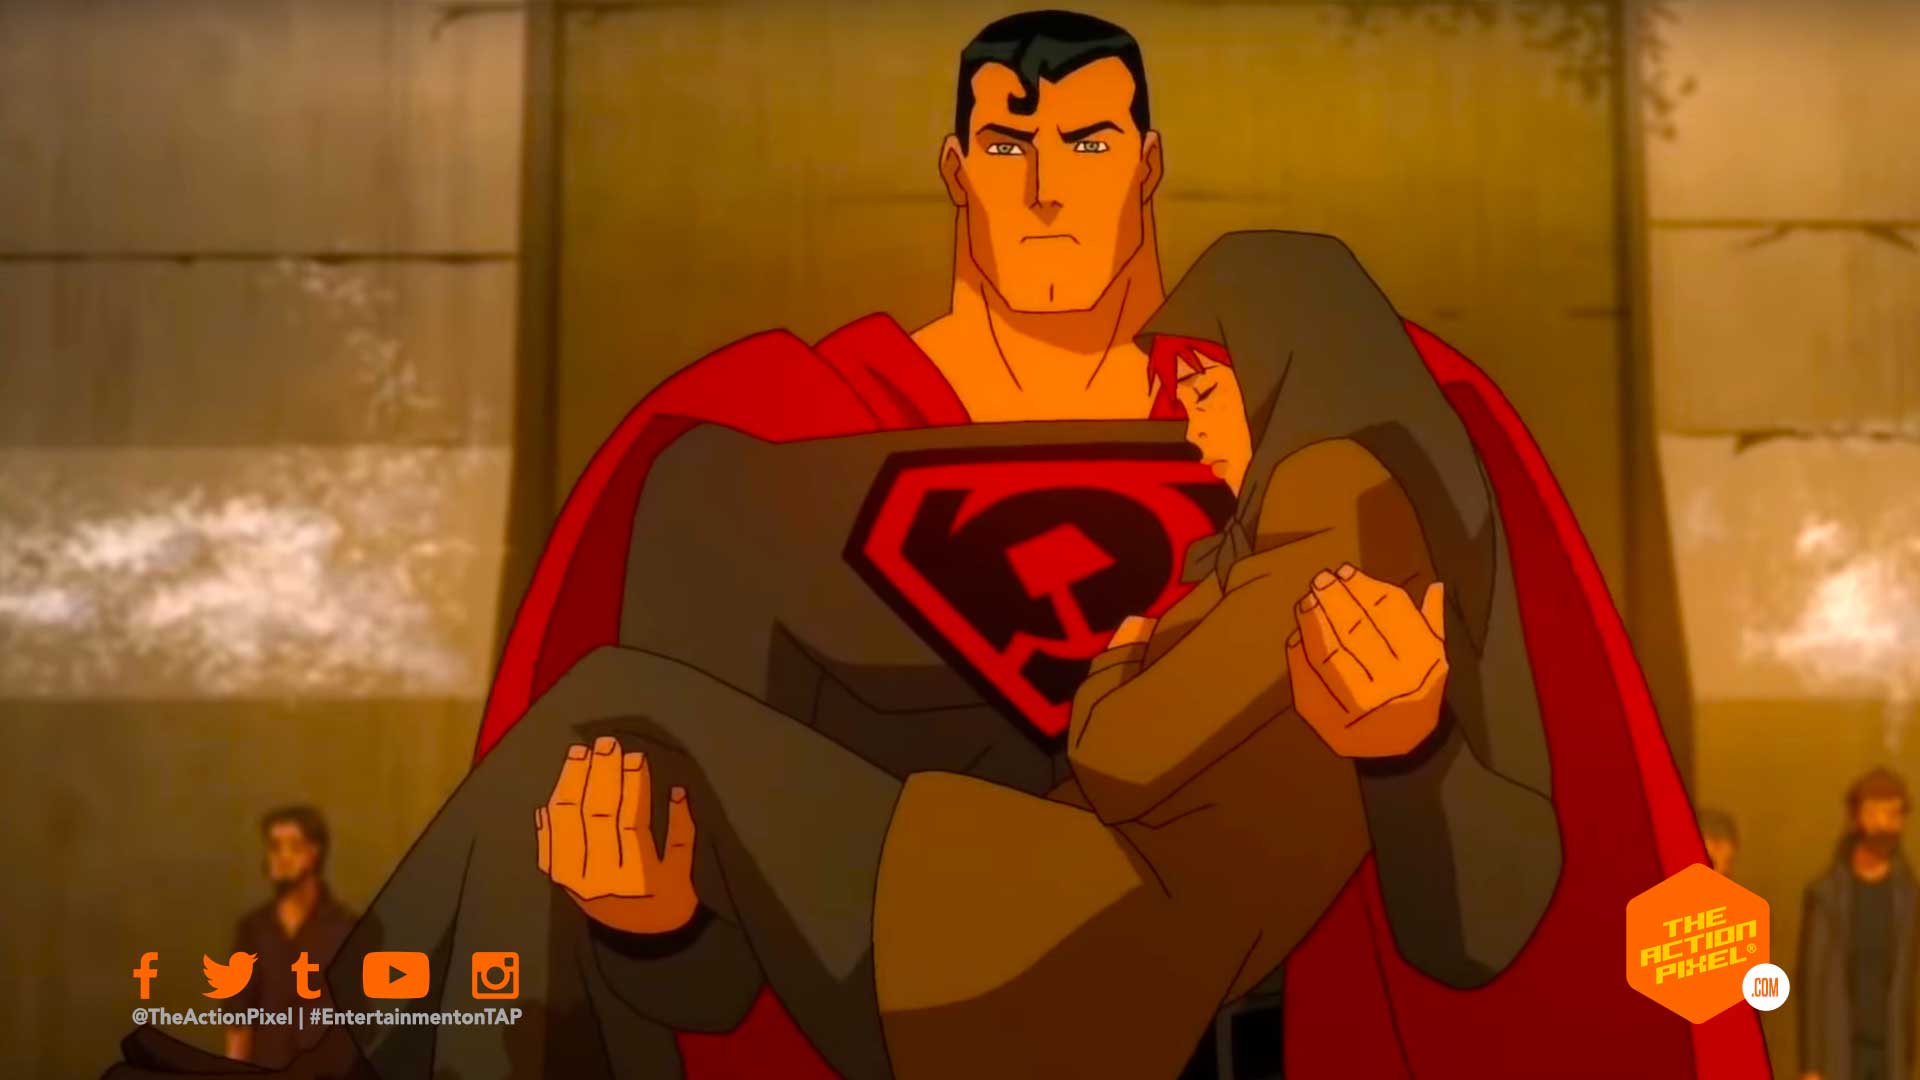 Russia gets their greatest weapon in the “Superman: Red Son